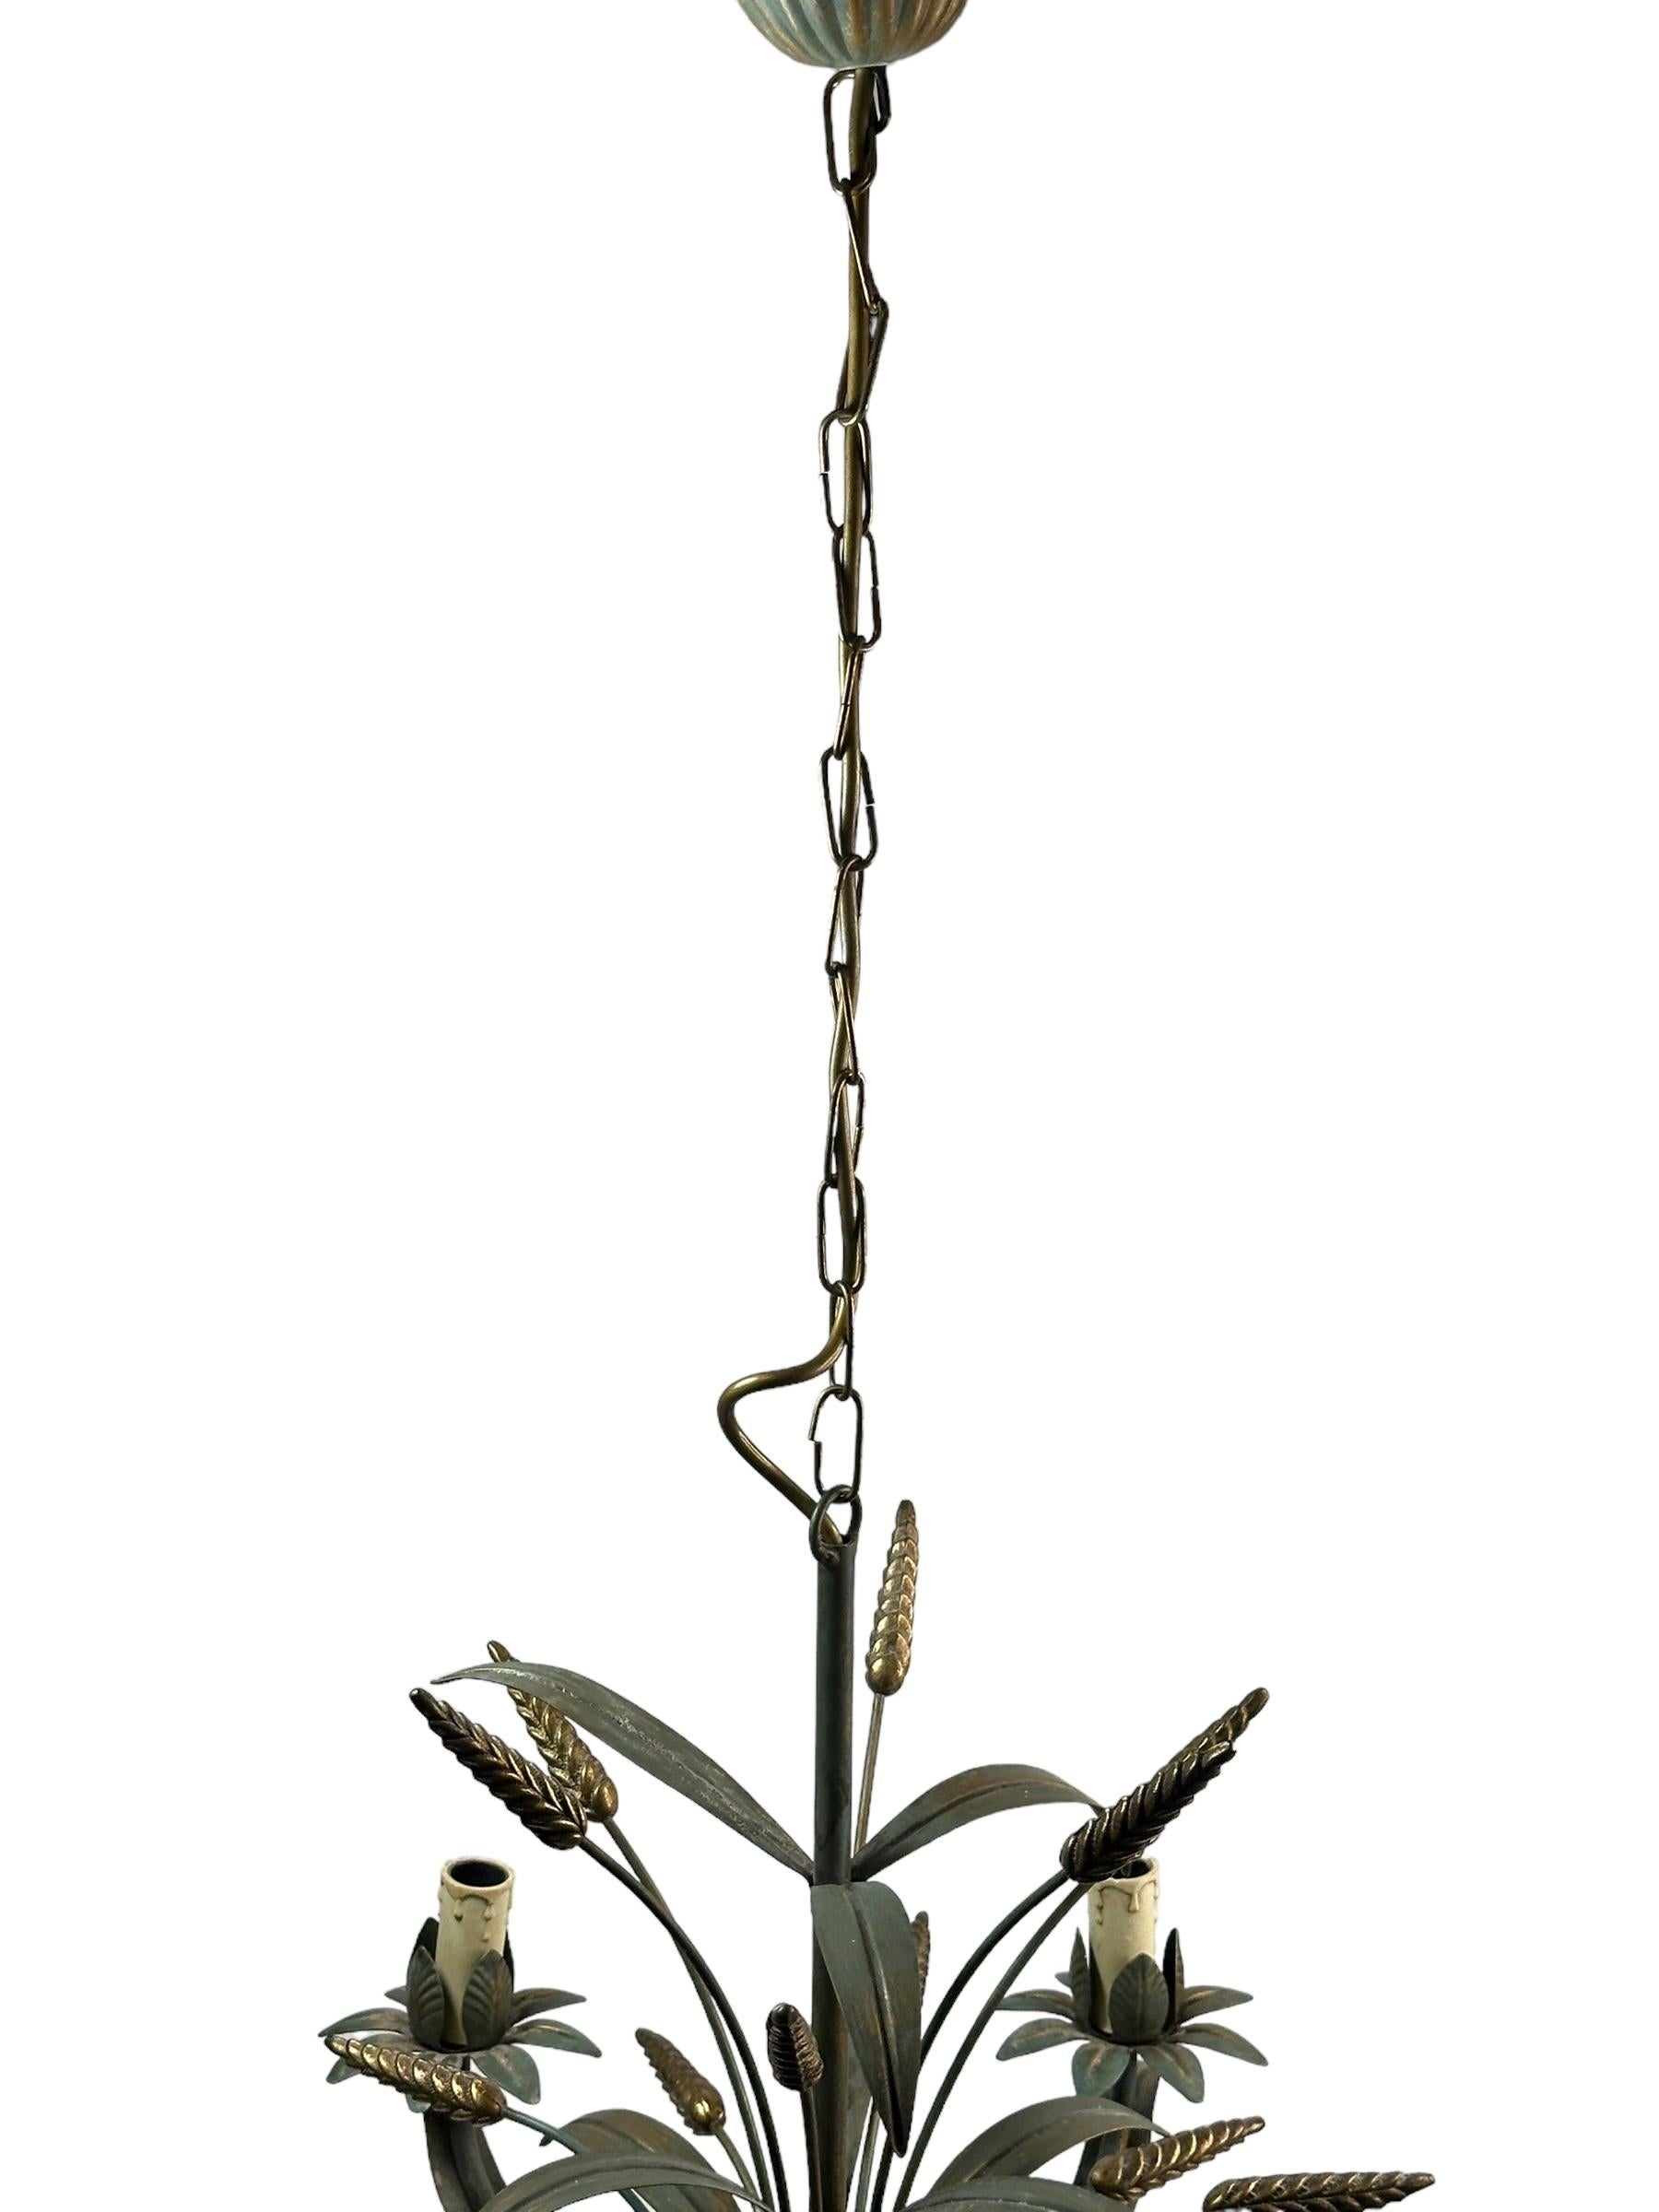 Mid-20th Century Five-Light Gilt Verdigris Metal Wheat Sheaf Tole Chandelier Coco Chanel Style For Sale